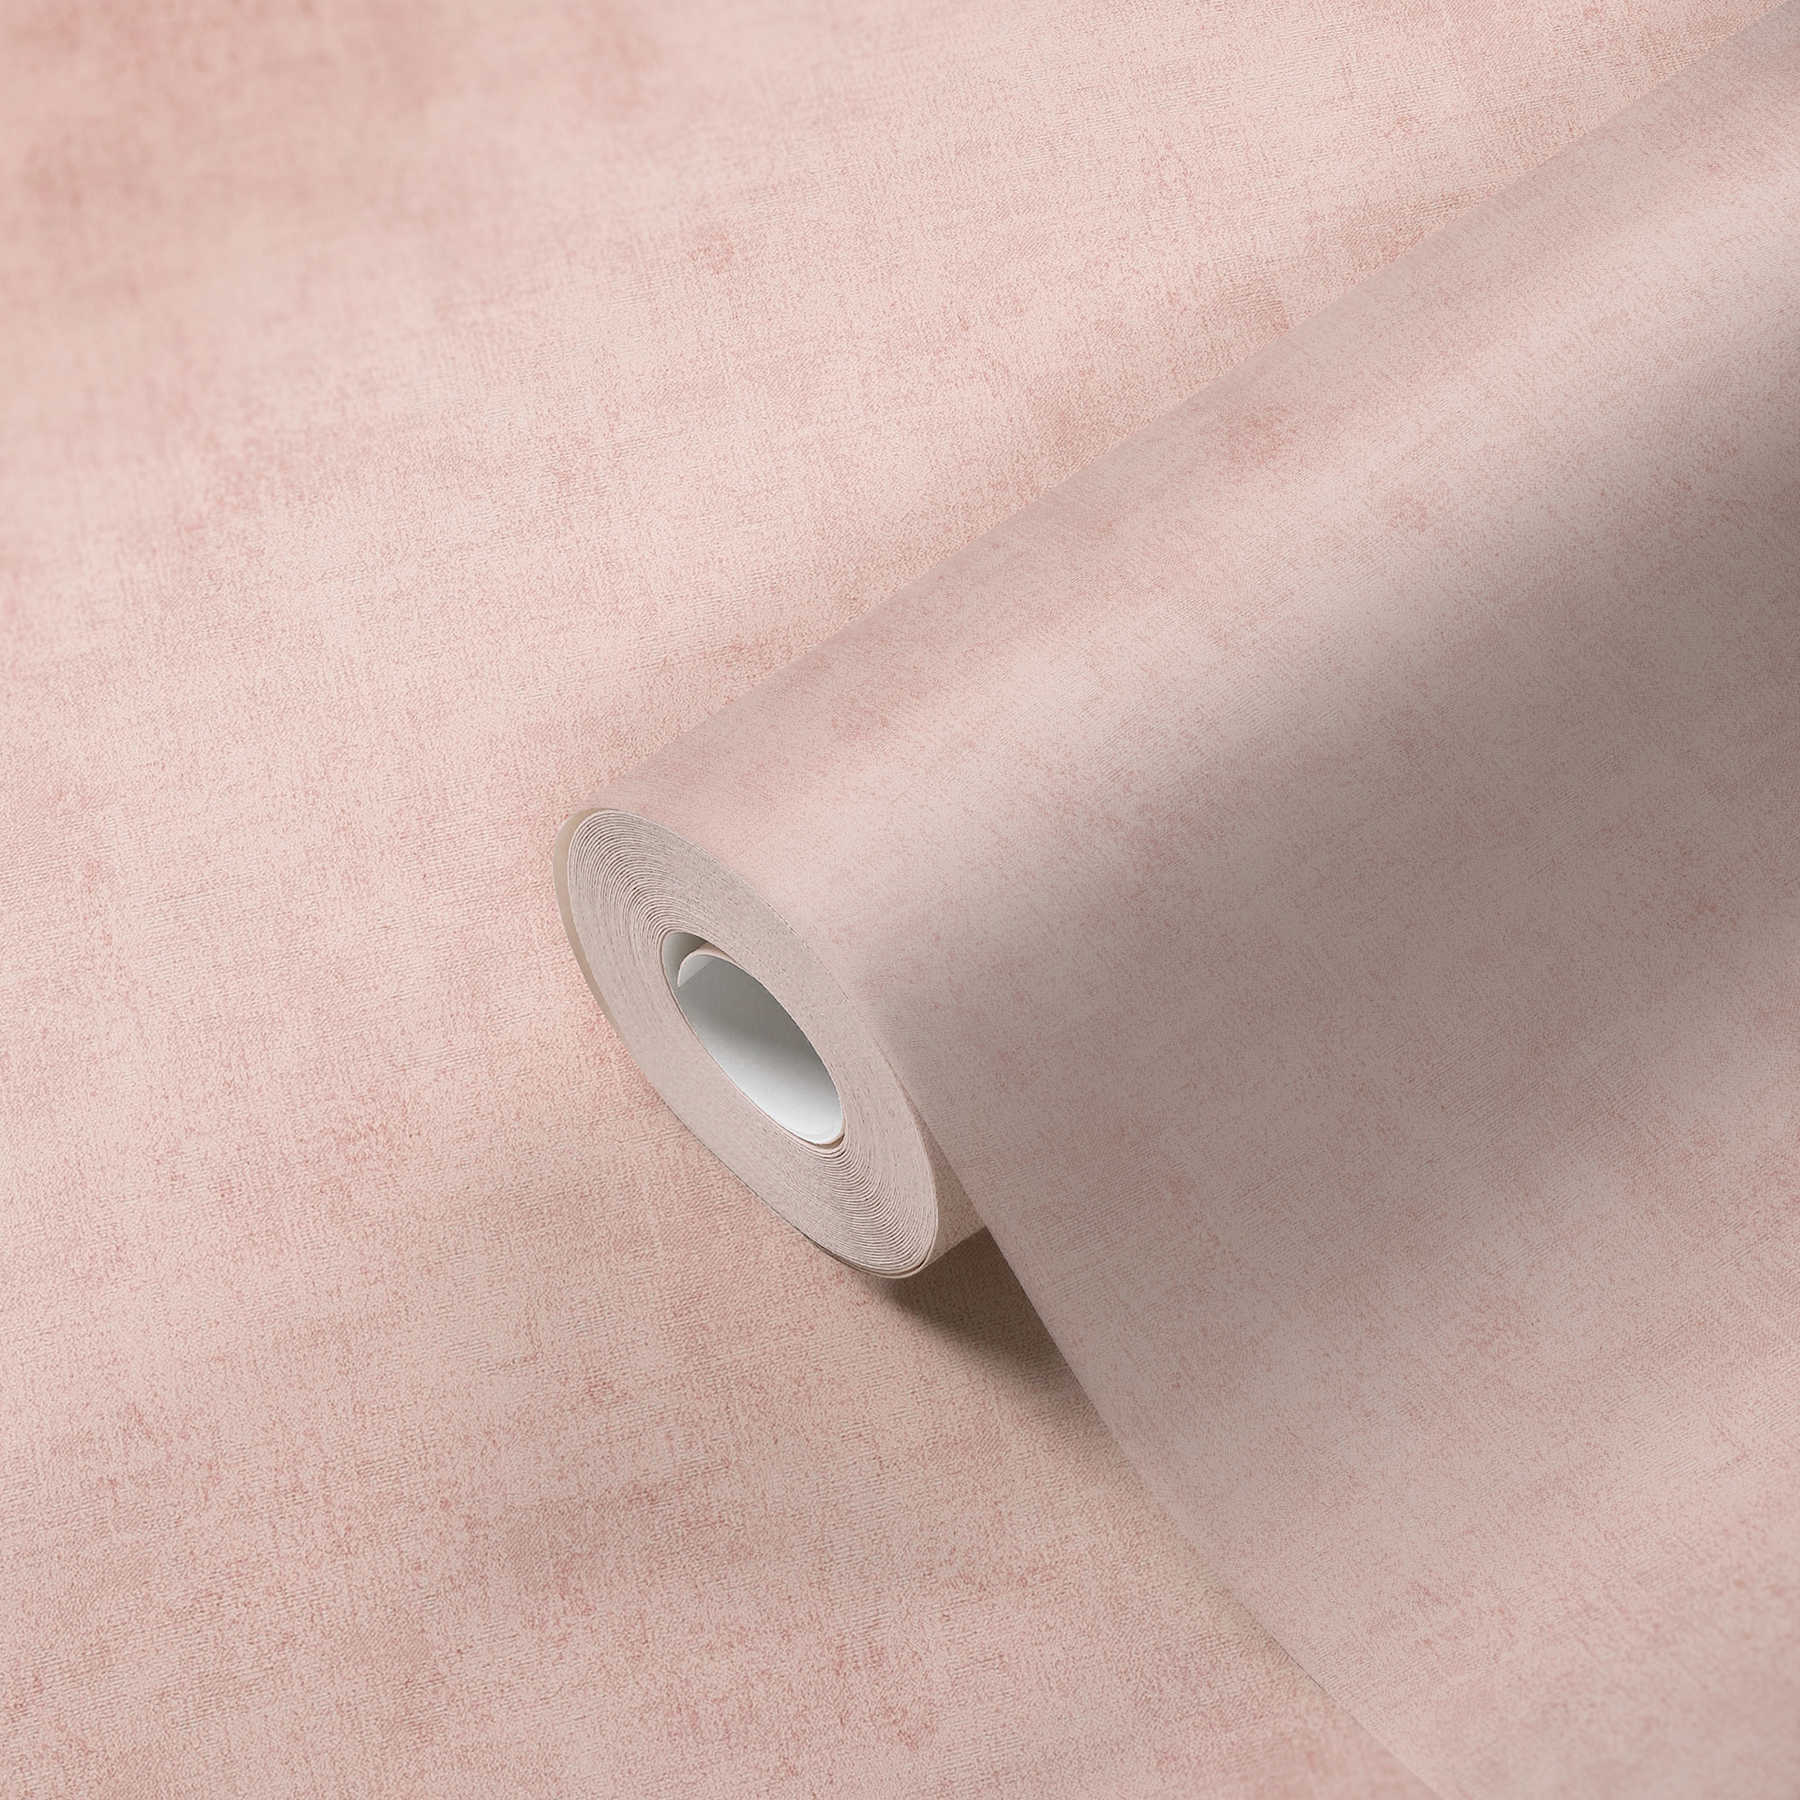             Wallpaper with discreet structure design - pink
        